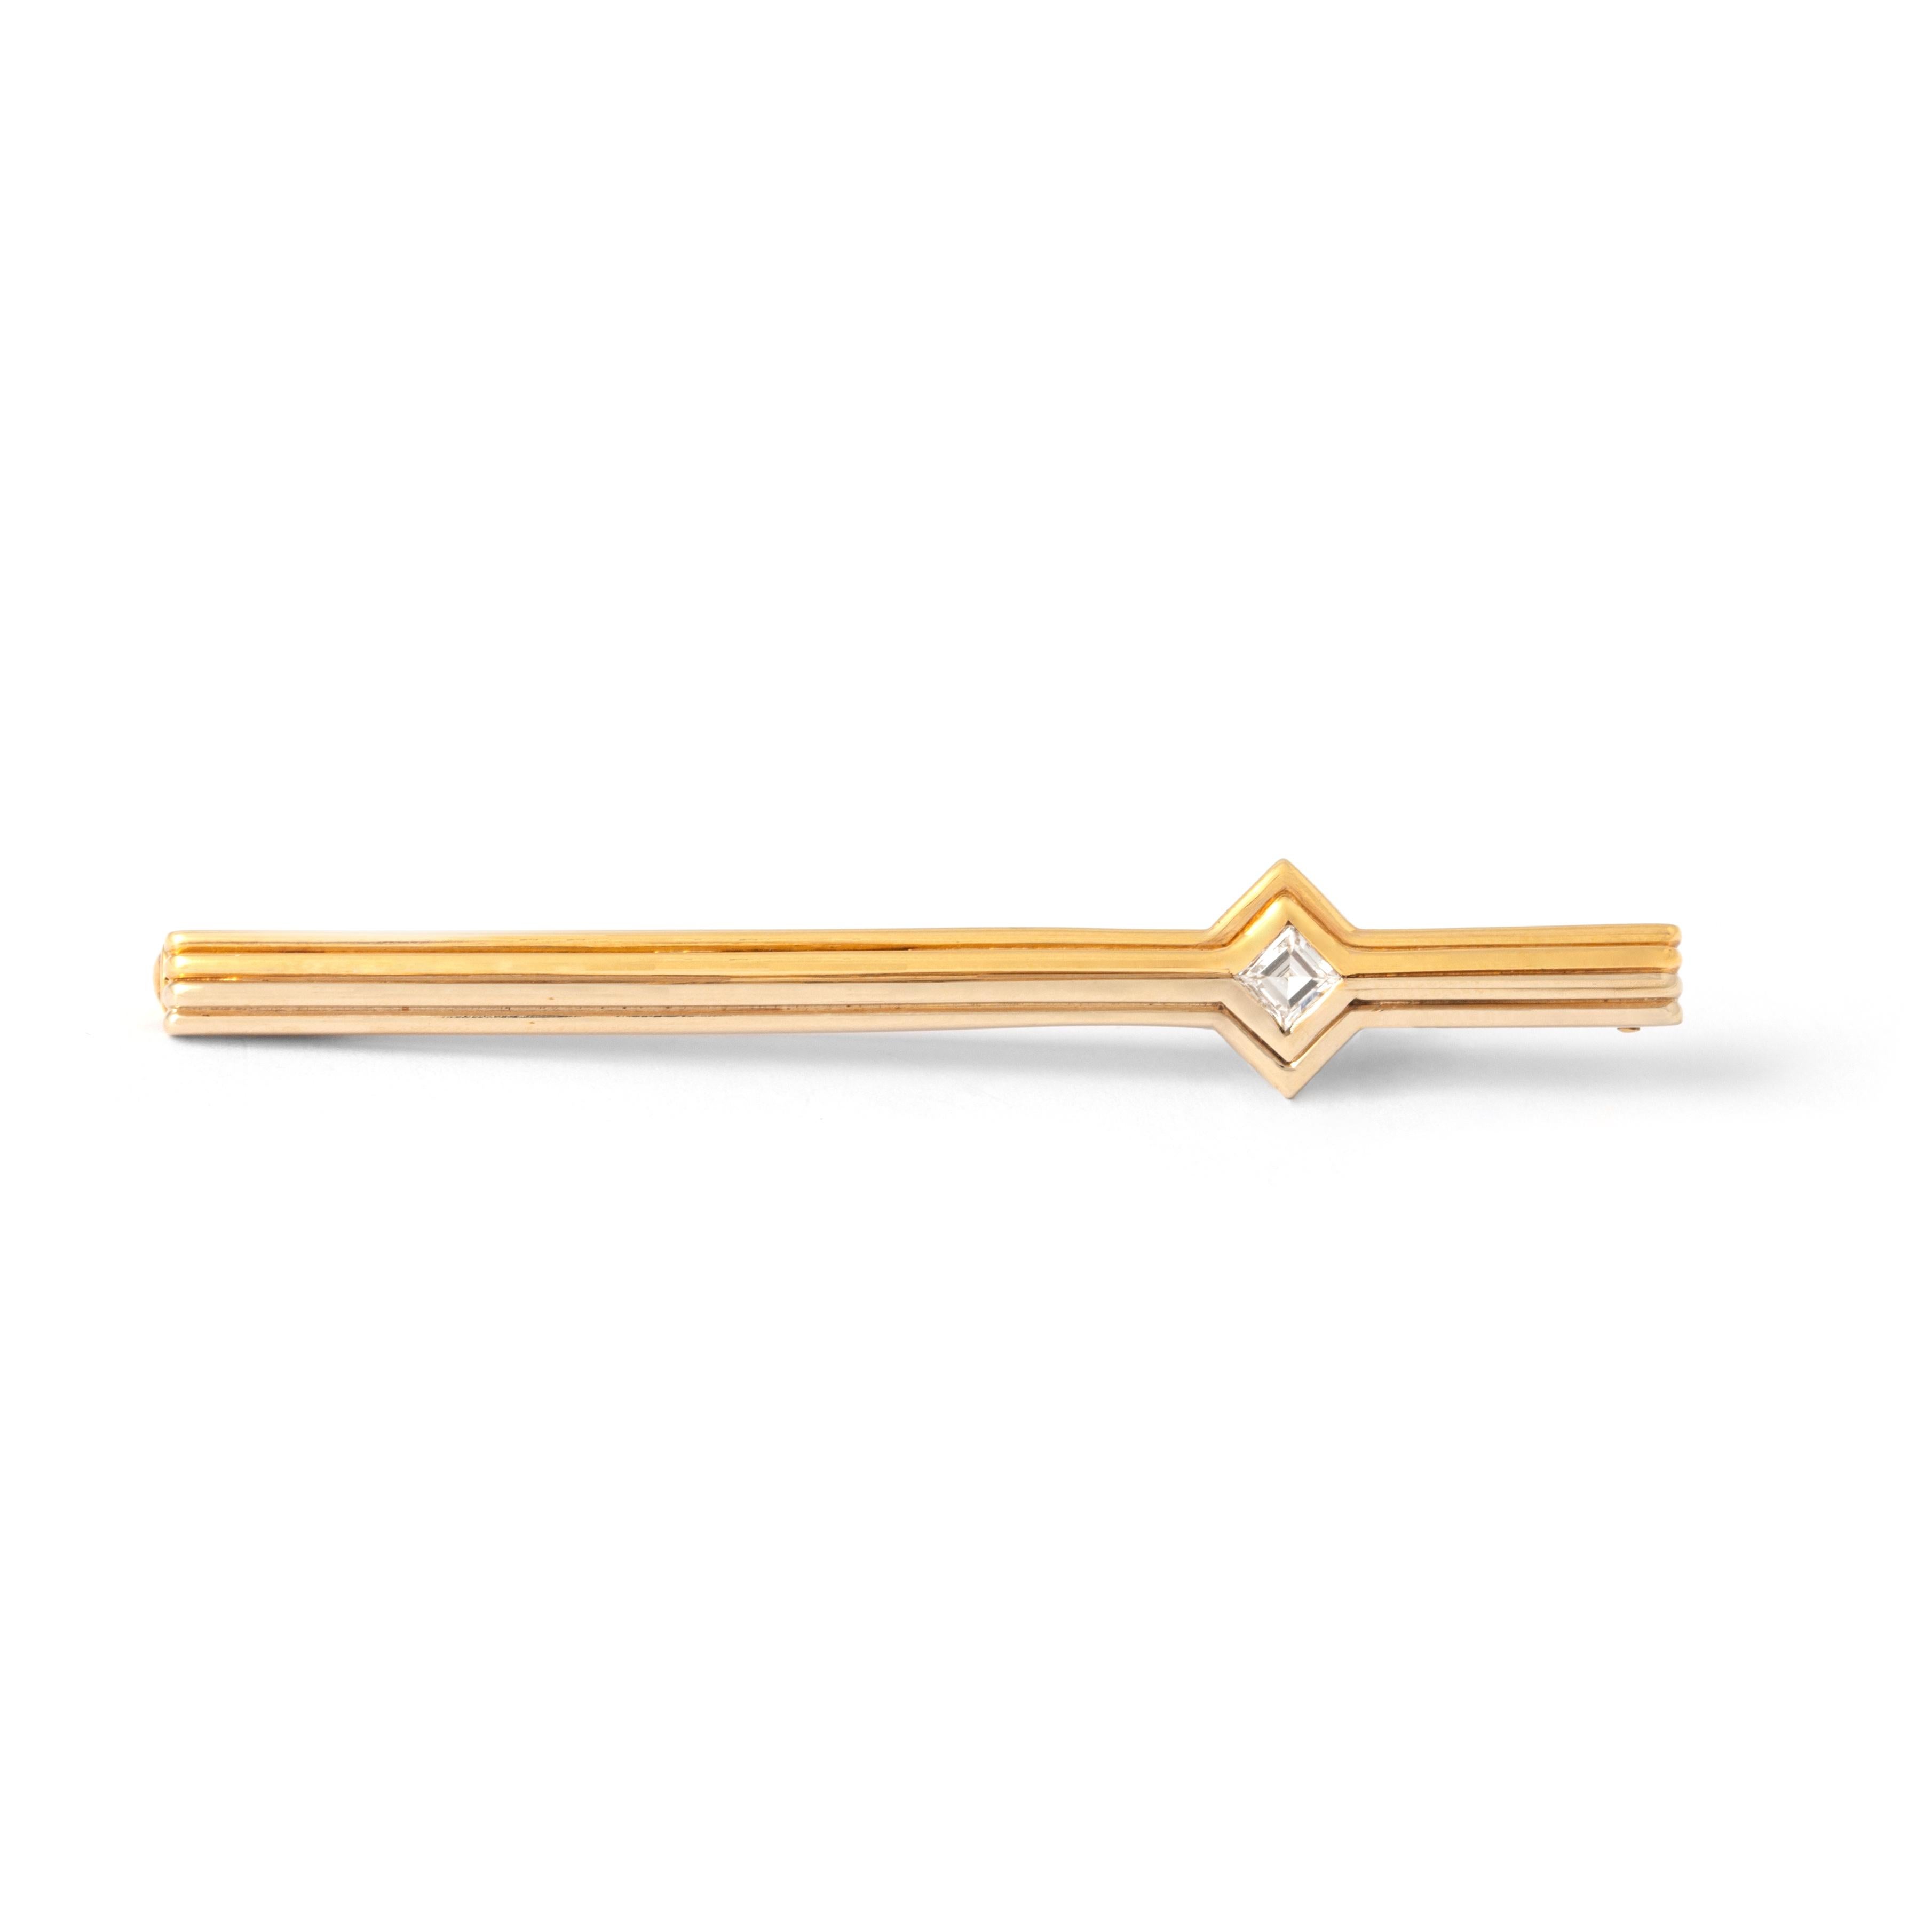 Diamond White and Yellow Gold 18K Brooch.
Set by one diamond square cut estimated 0.22 carat.
